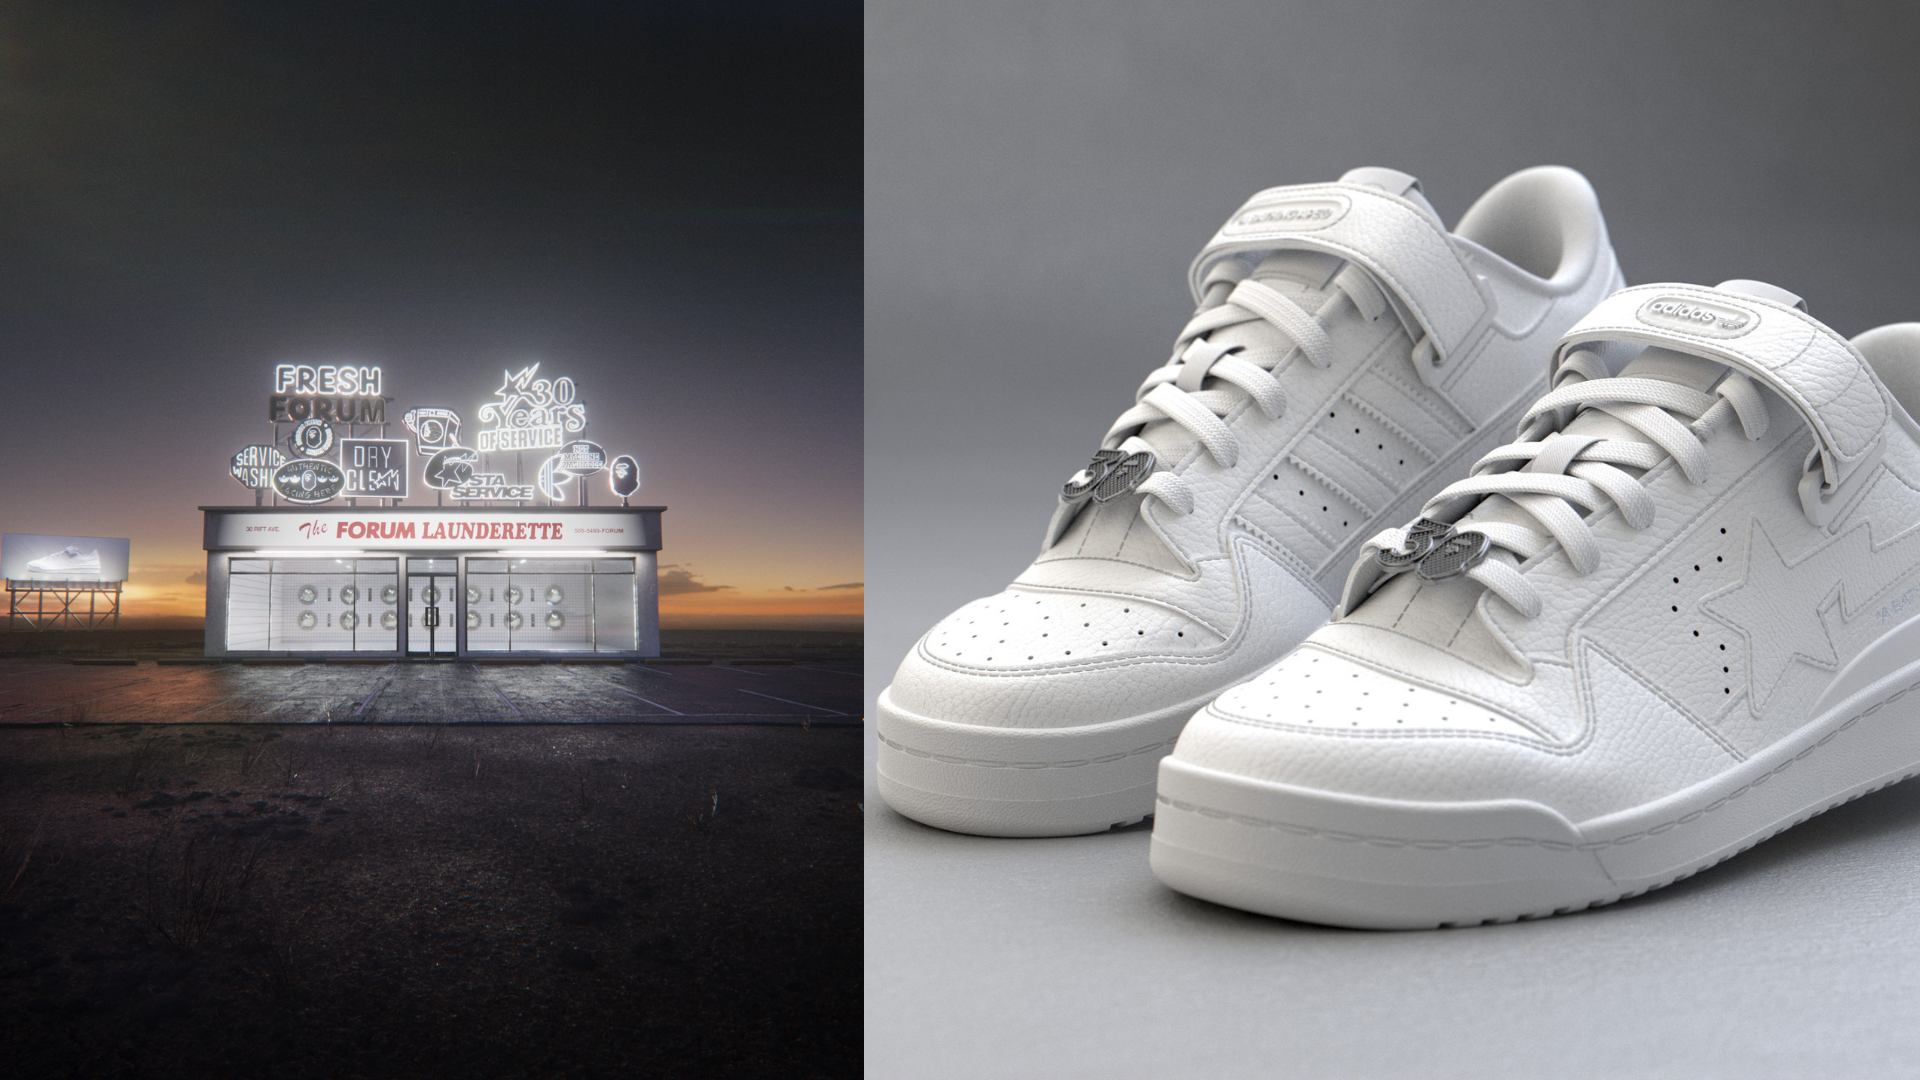 adidas x bape nft sneaker collaboration pictures depicting the Forum 84 BAPE® Low Triple-White sneakers 